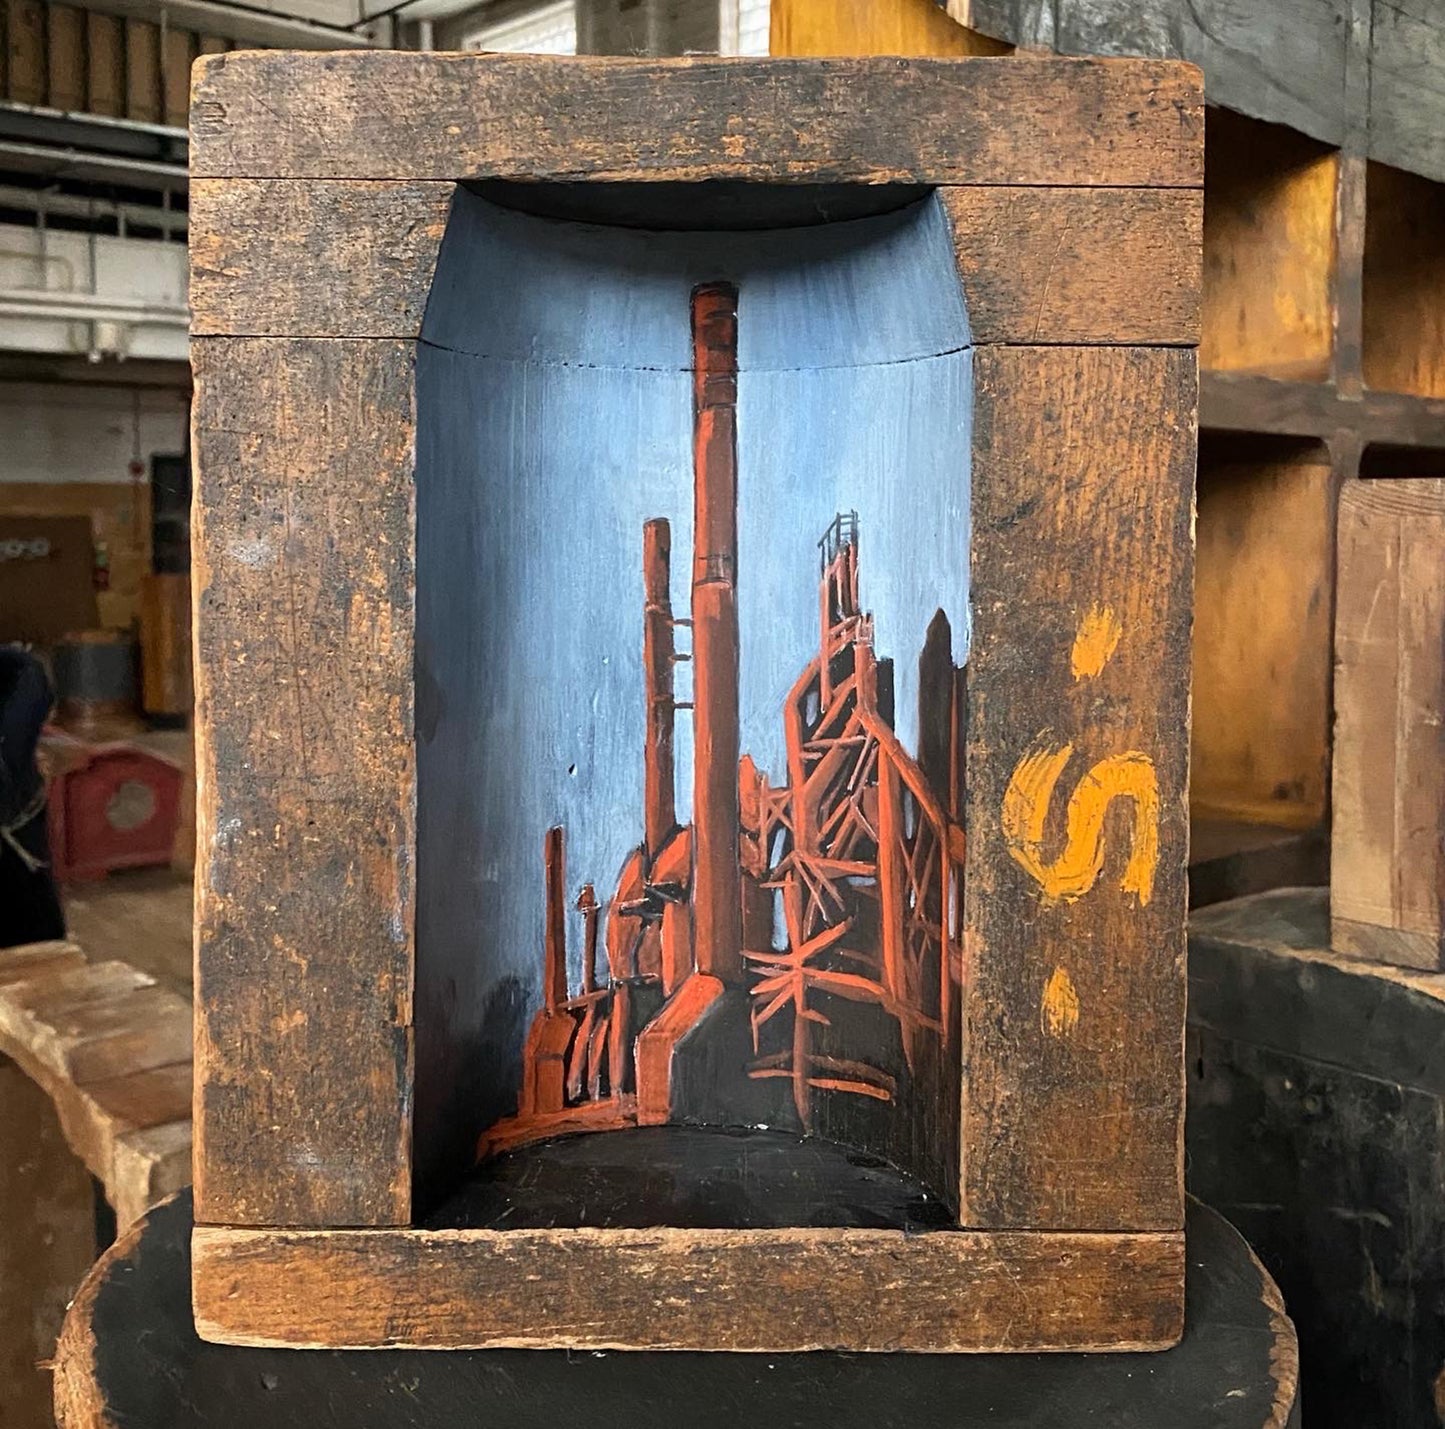 Core Box Mill Painting - 12h x 9h x 4d inches